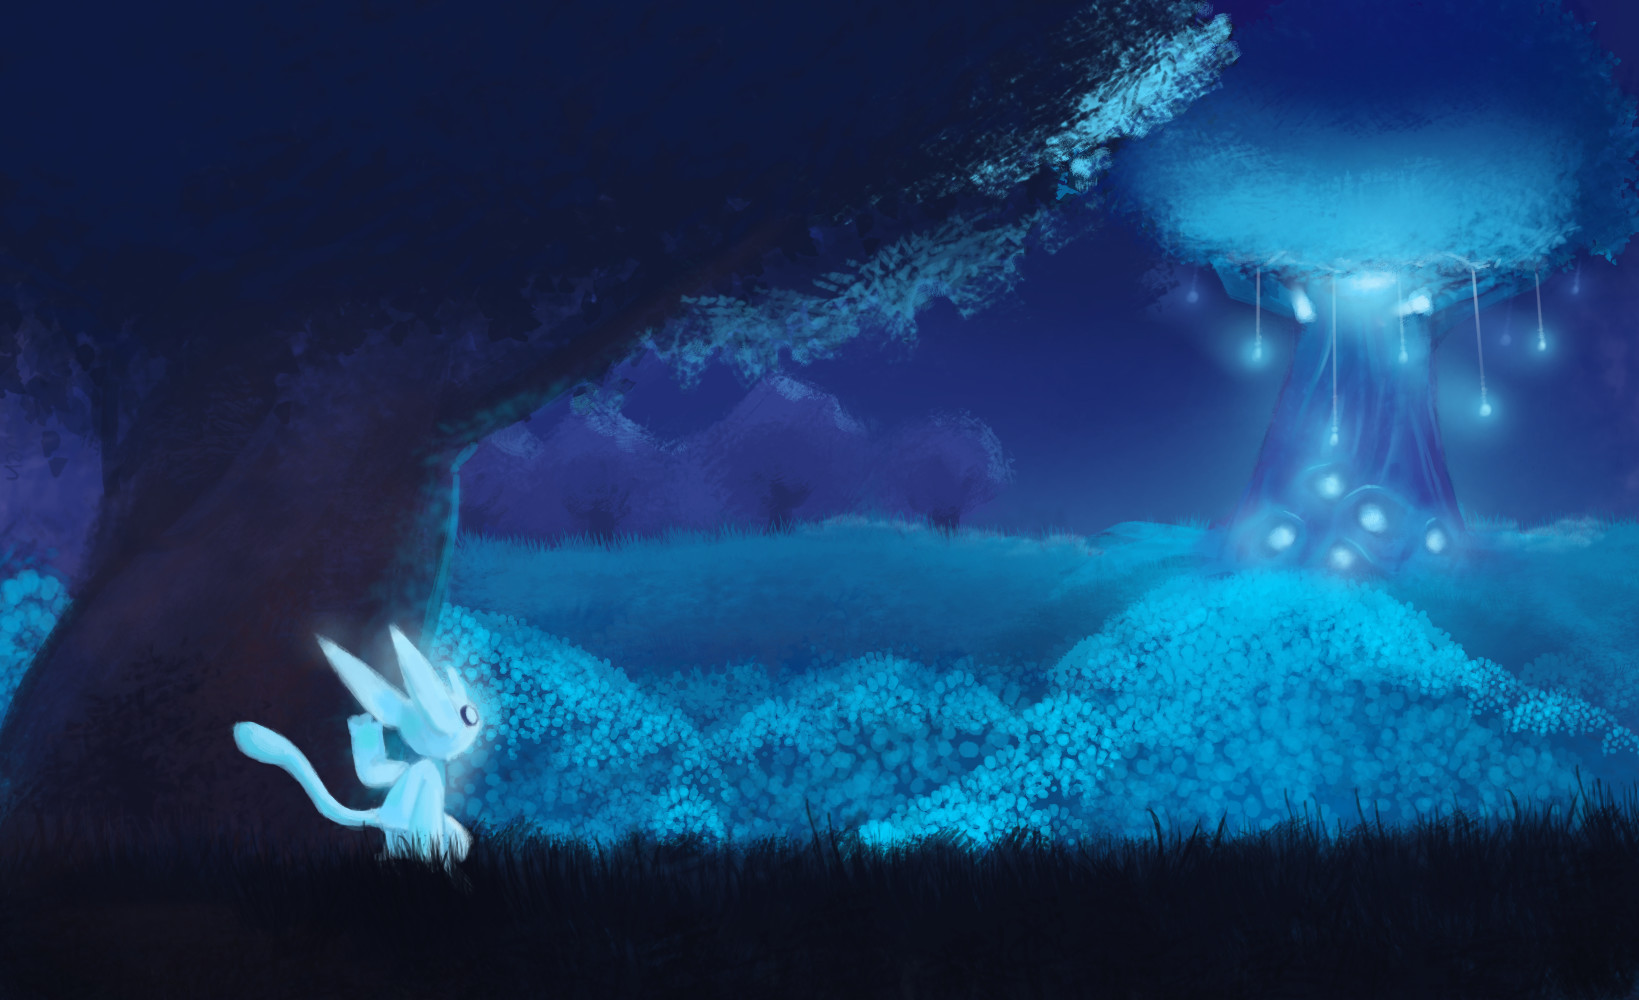 fanart of ori and the blind forest by moon studios. 